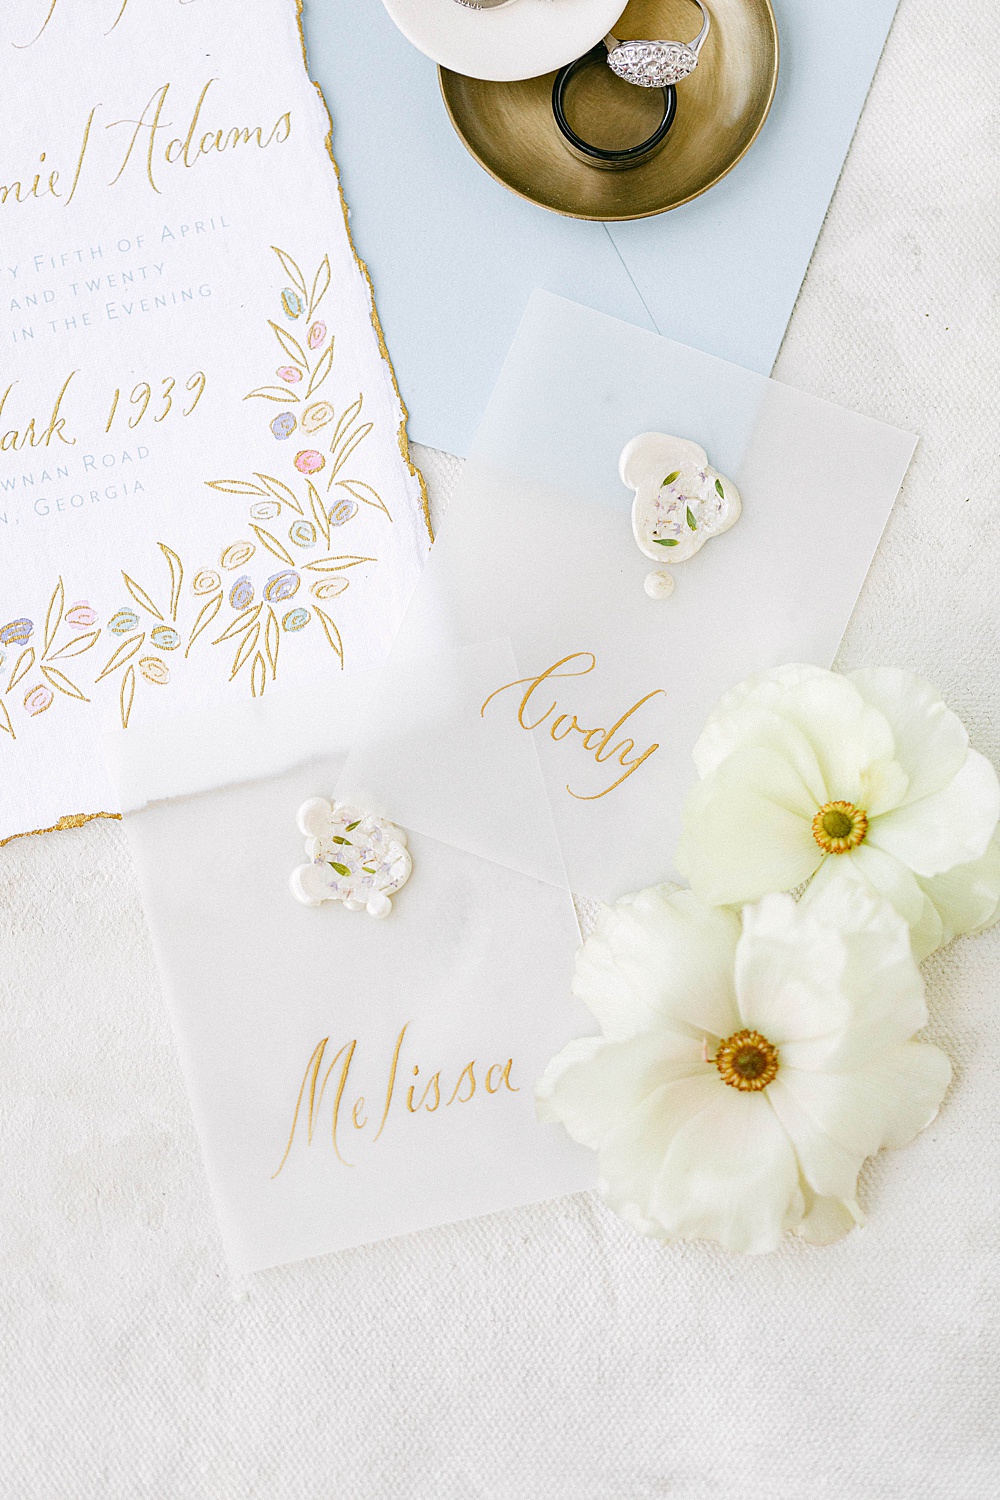 Bride and Groom name cards for a Meadowlark 1939 elopement